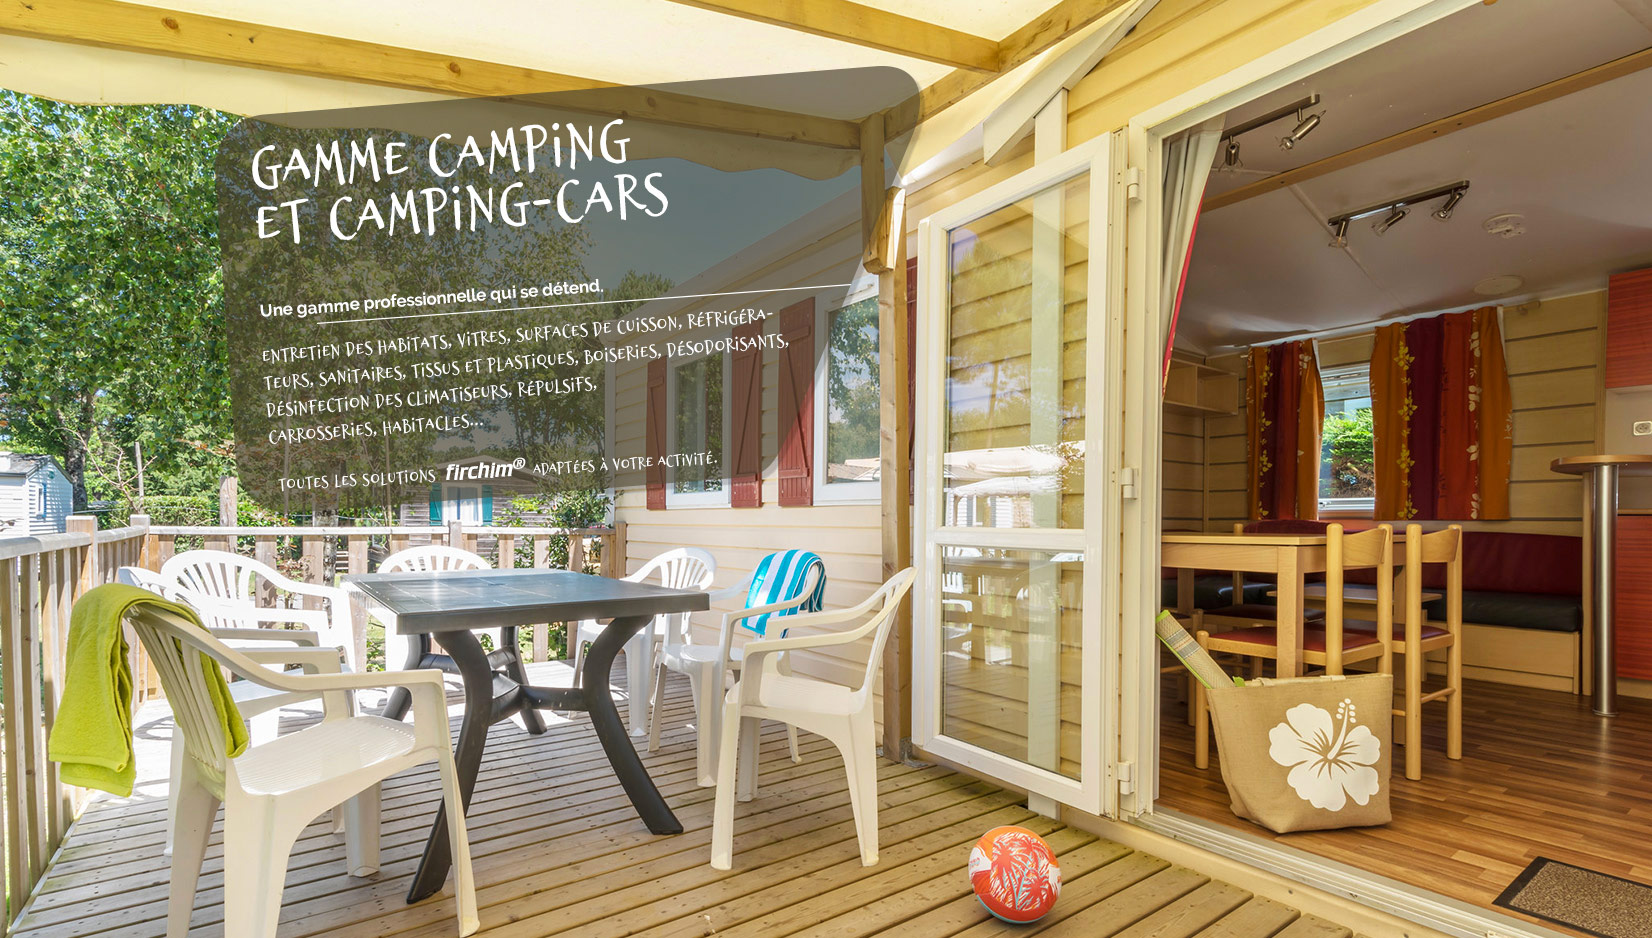 Gamme Camping et Camping-Cars